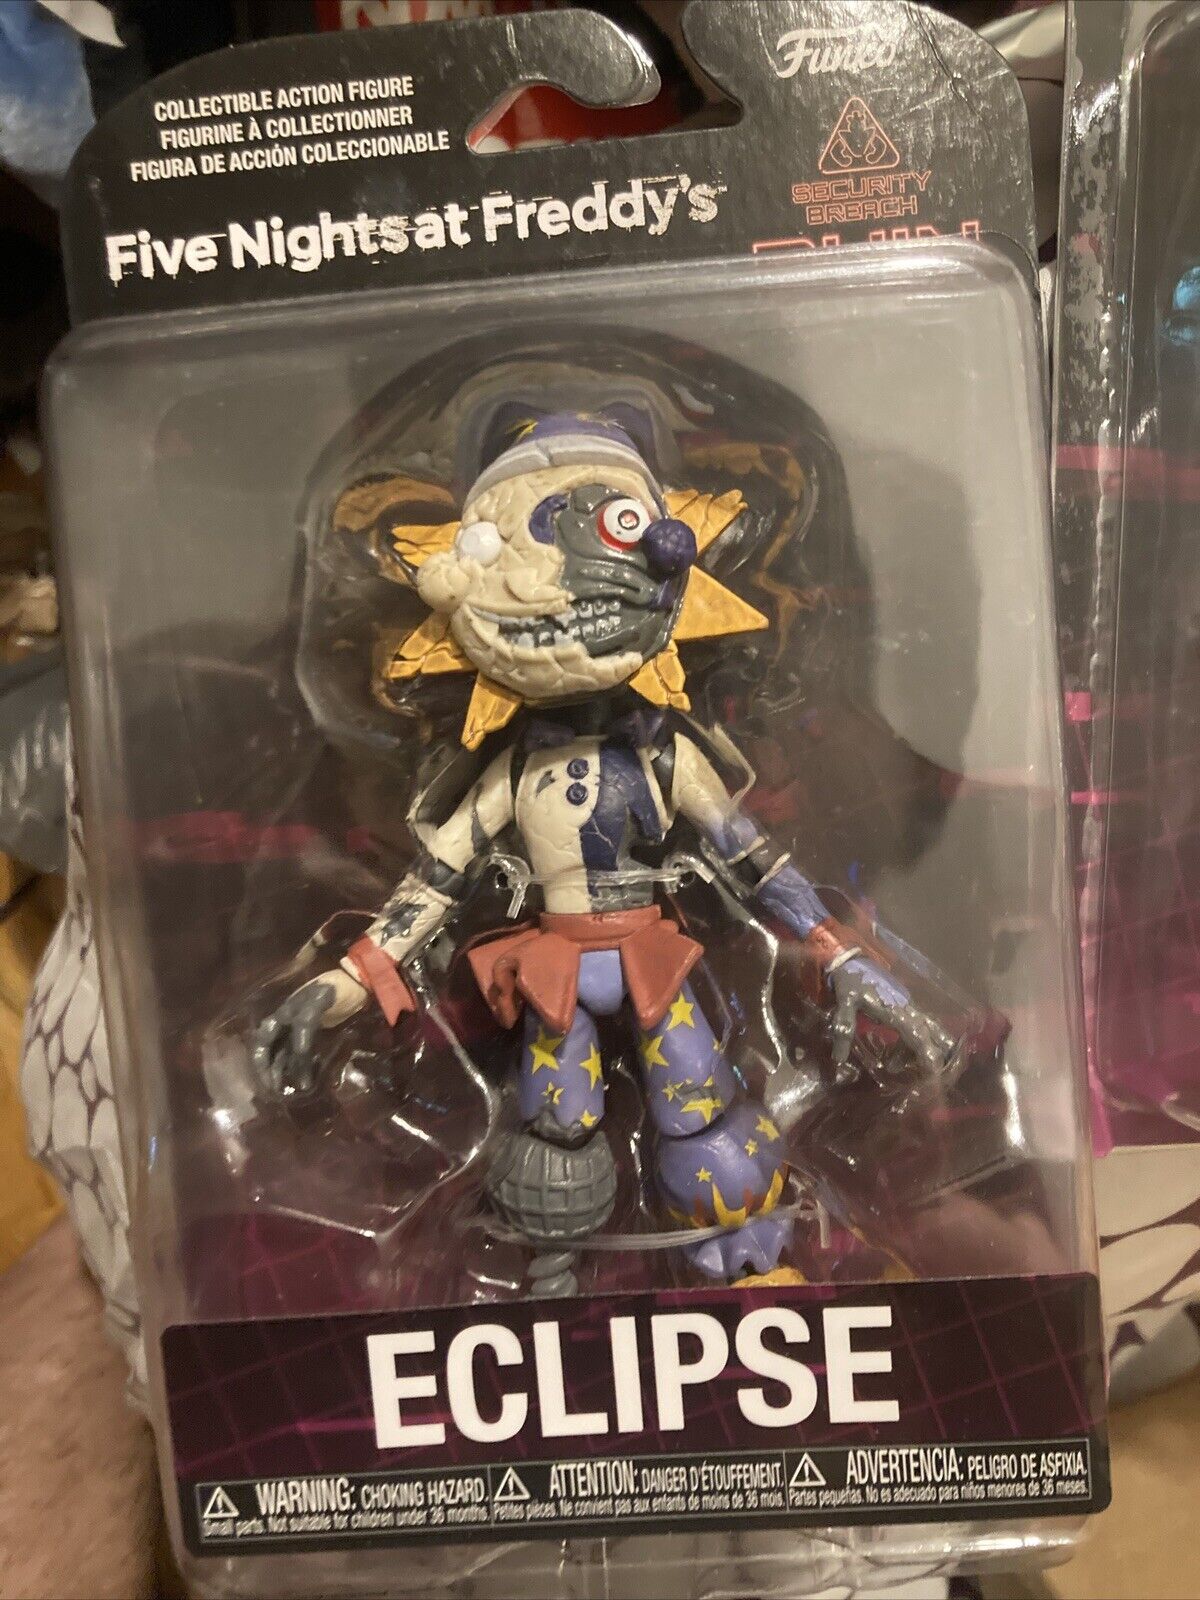 Funko Five Nights At Freddy’s: Security Breach Ruined Eclipse Figure In Hand